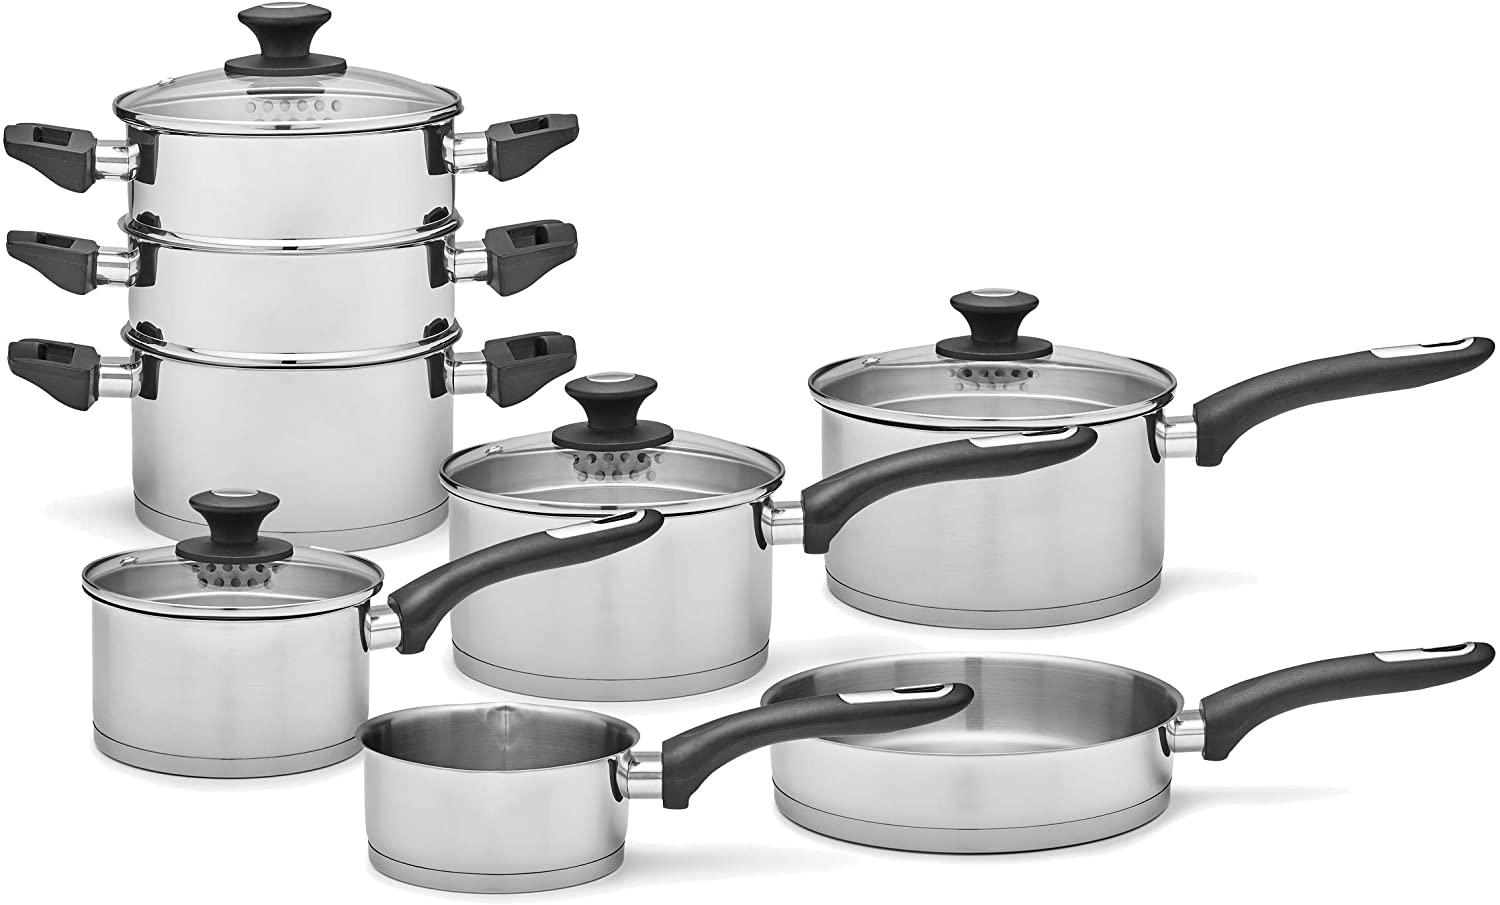 Morphy Richards Morphy Equip Series Pan Set, Stainless Steel Construction and Stay Cool Bakelite Handles